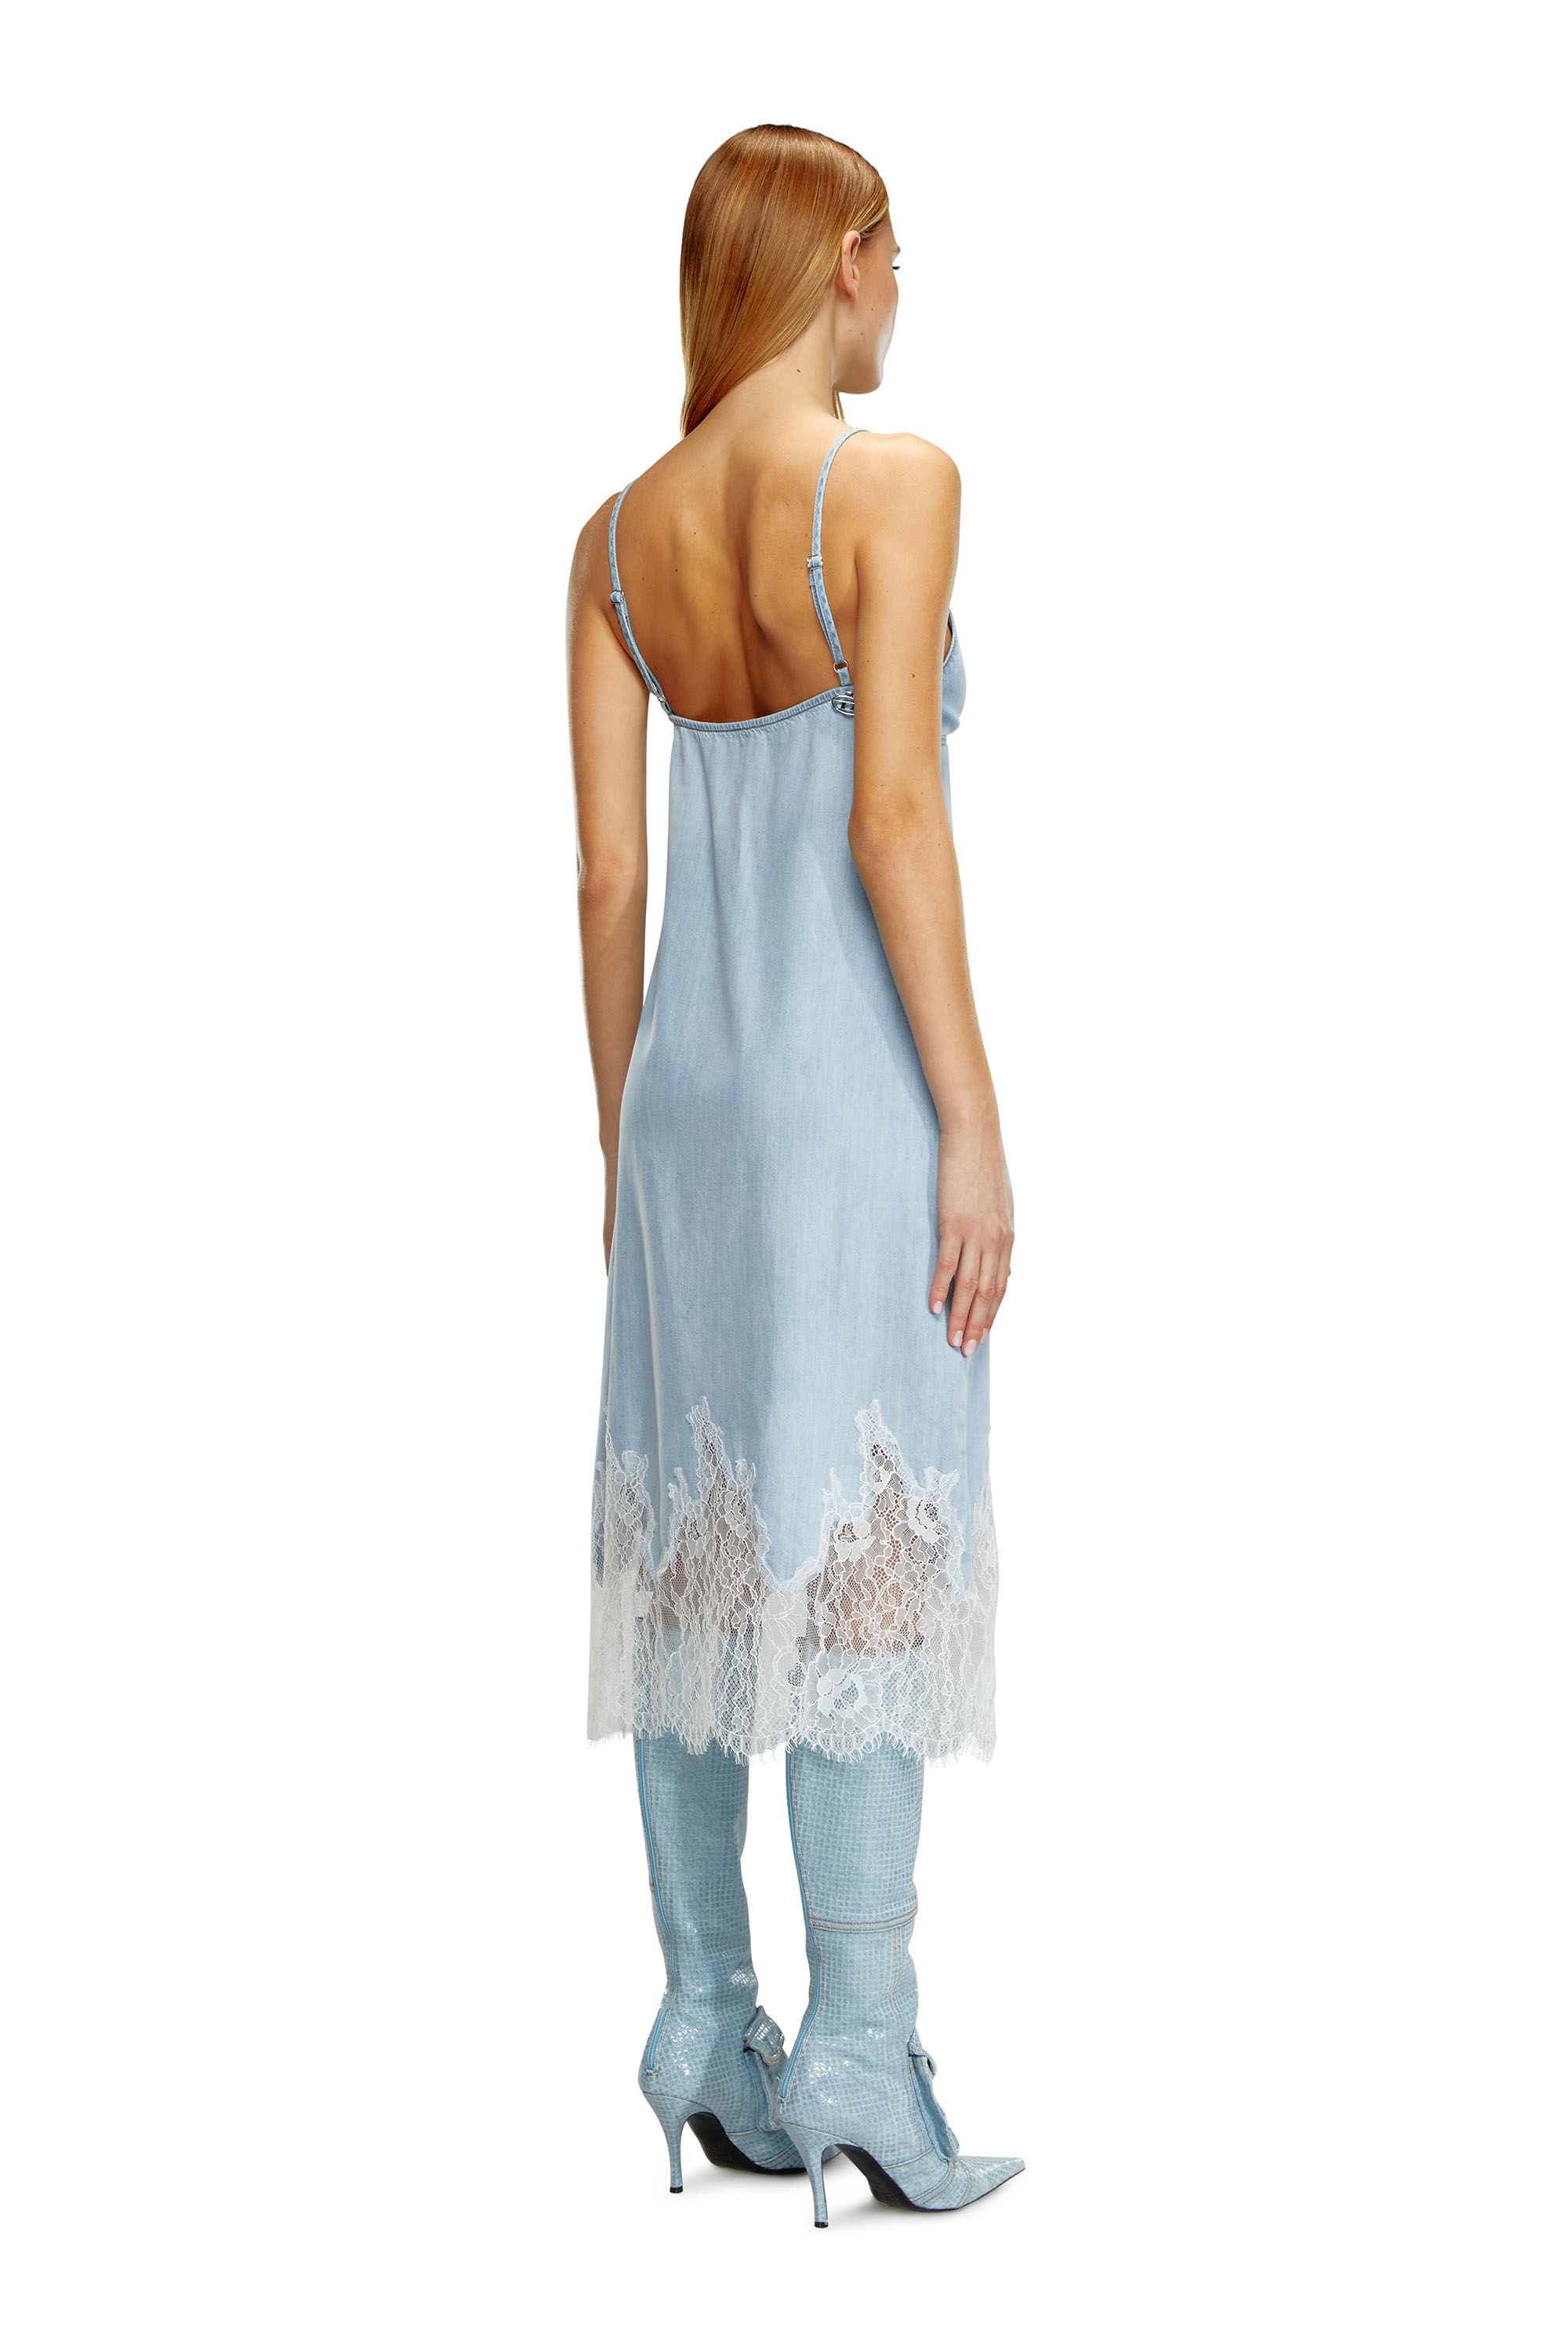 Diesel - DE-RUDE-S, Woman Strappy dress in denim and lace in Blue - Image 2